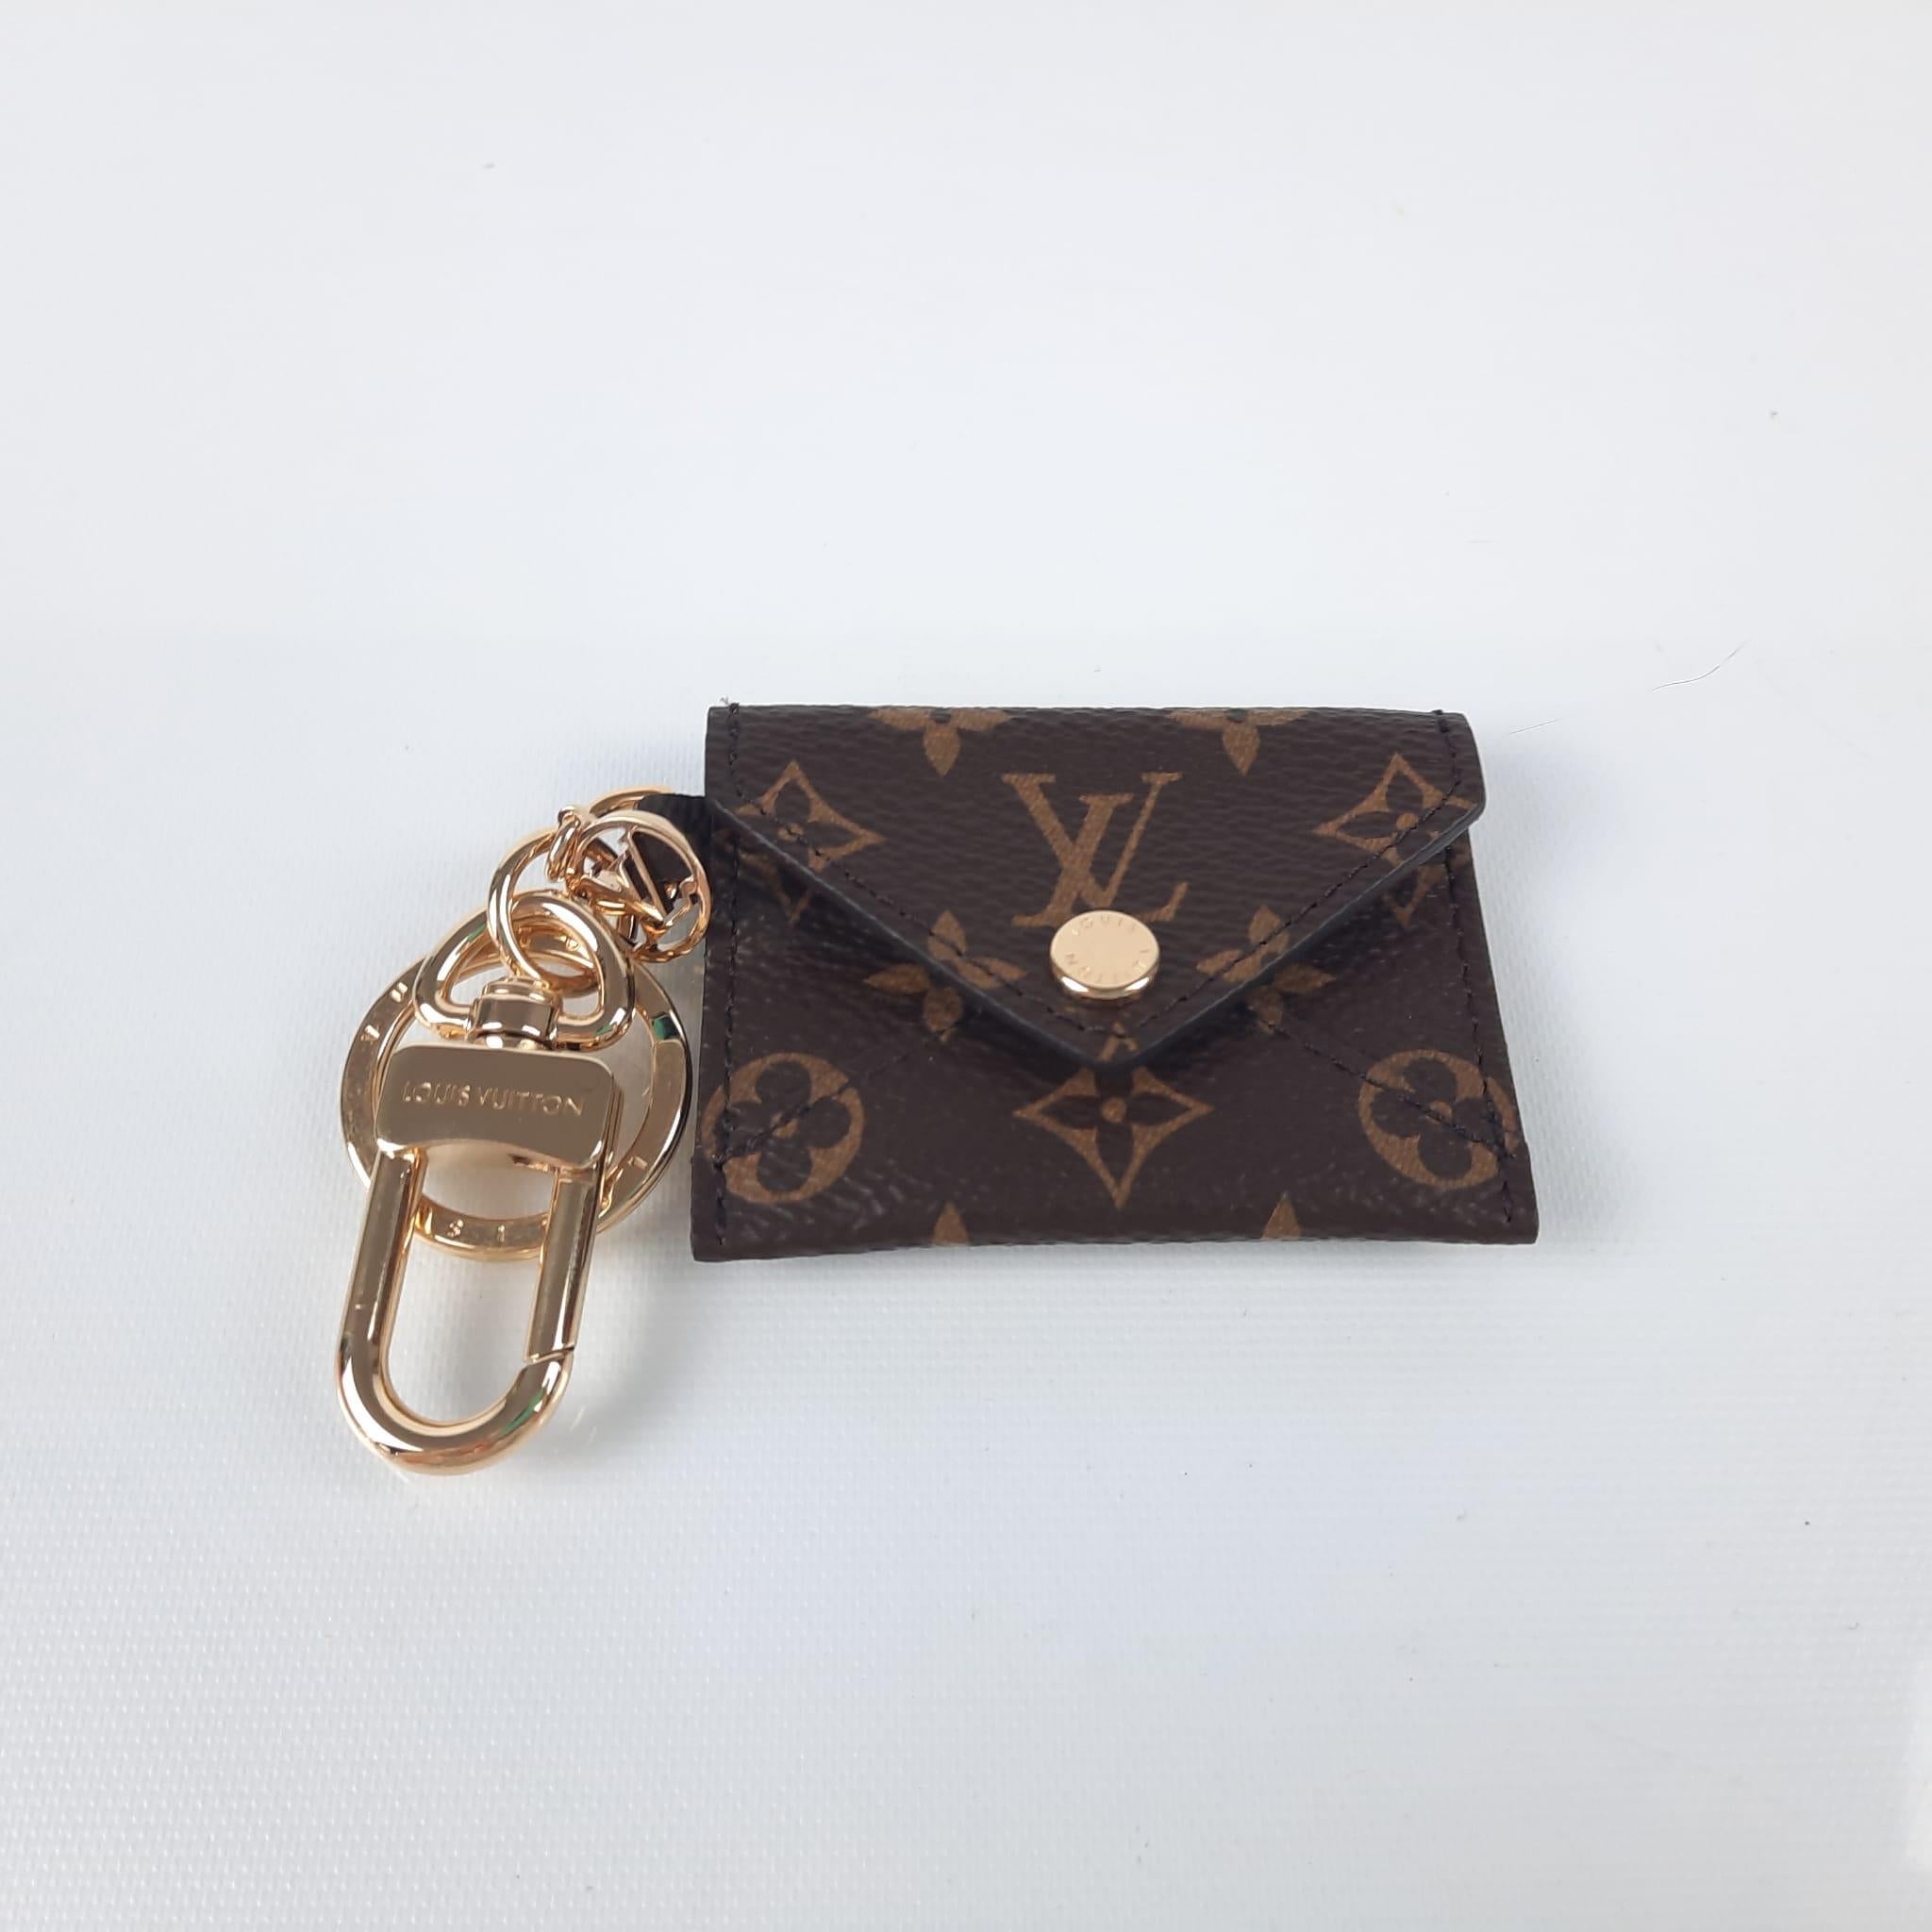 LOUIS VUITTON KIRIGAMI EPI POUCH BAG CHARM AND KEYCHAIN HOLDER